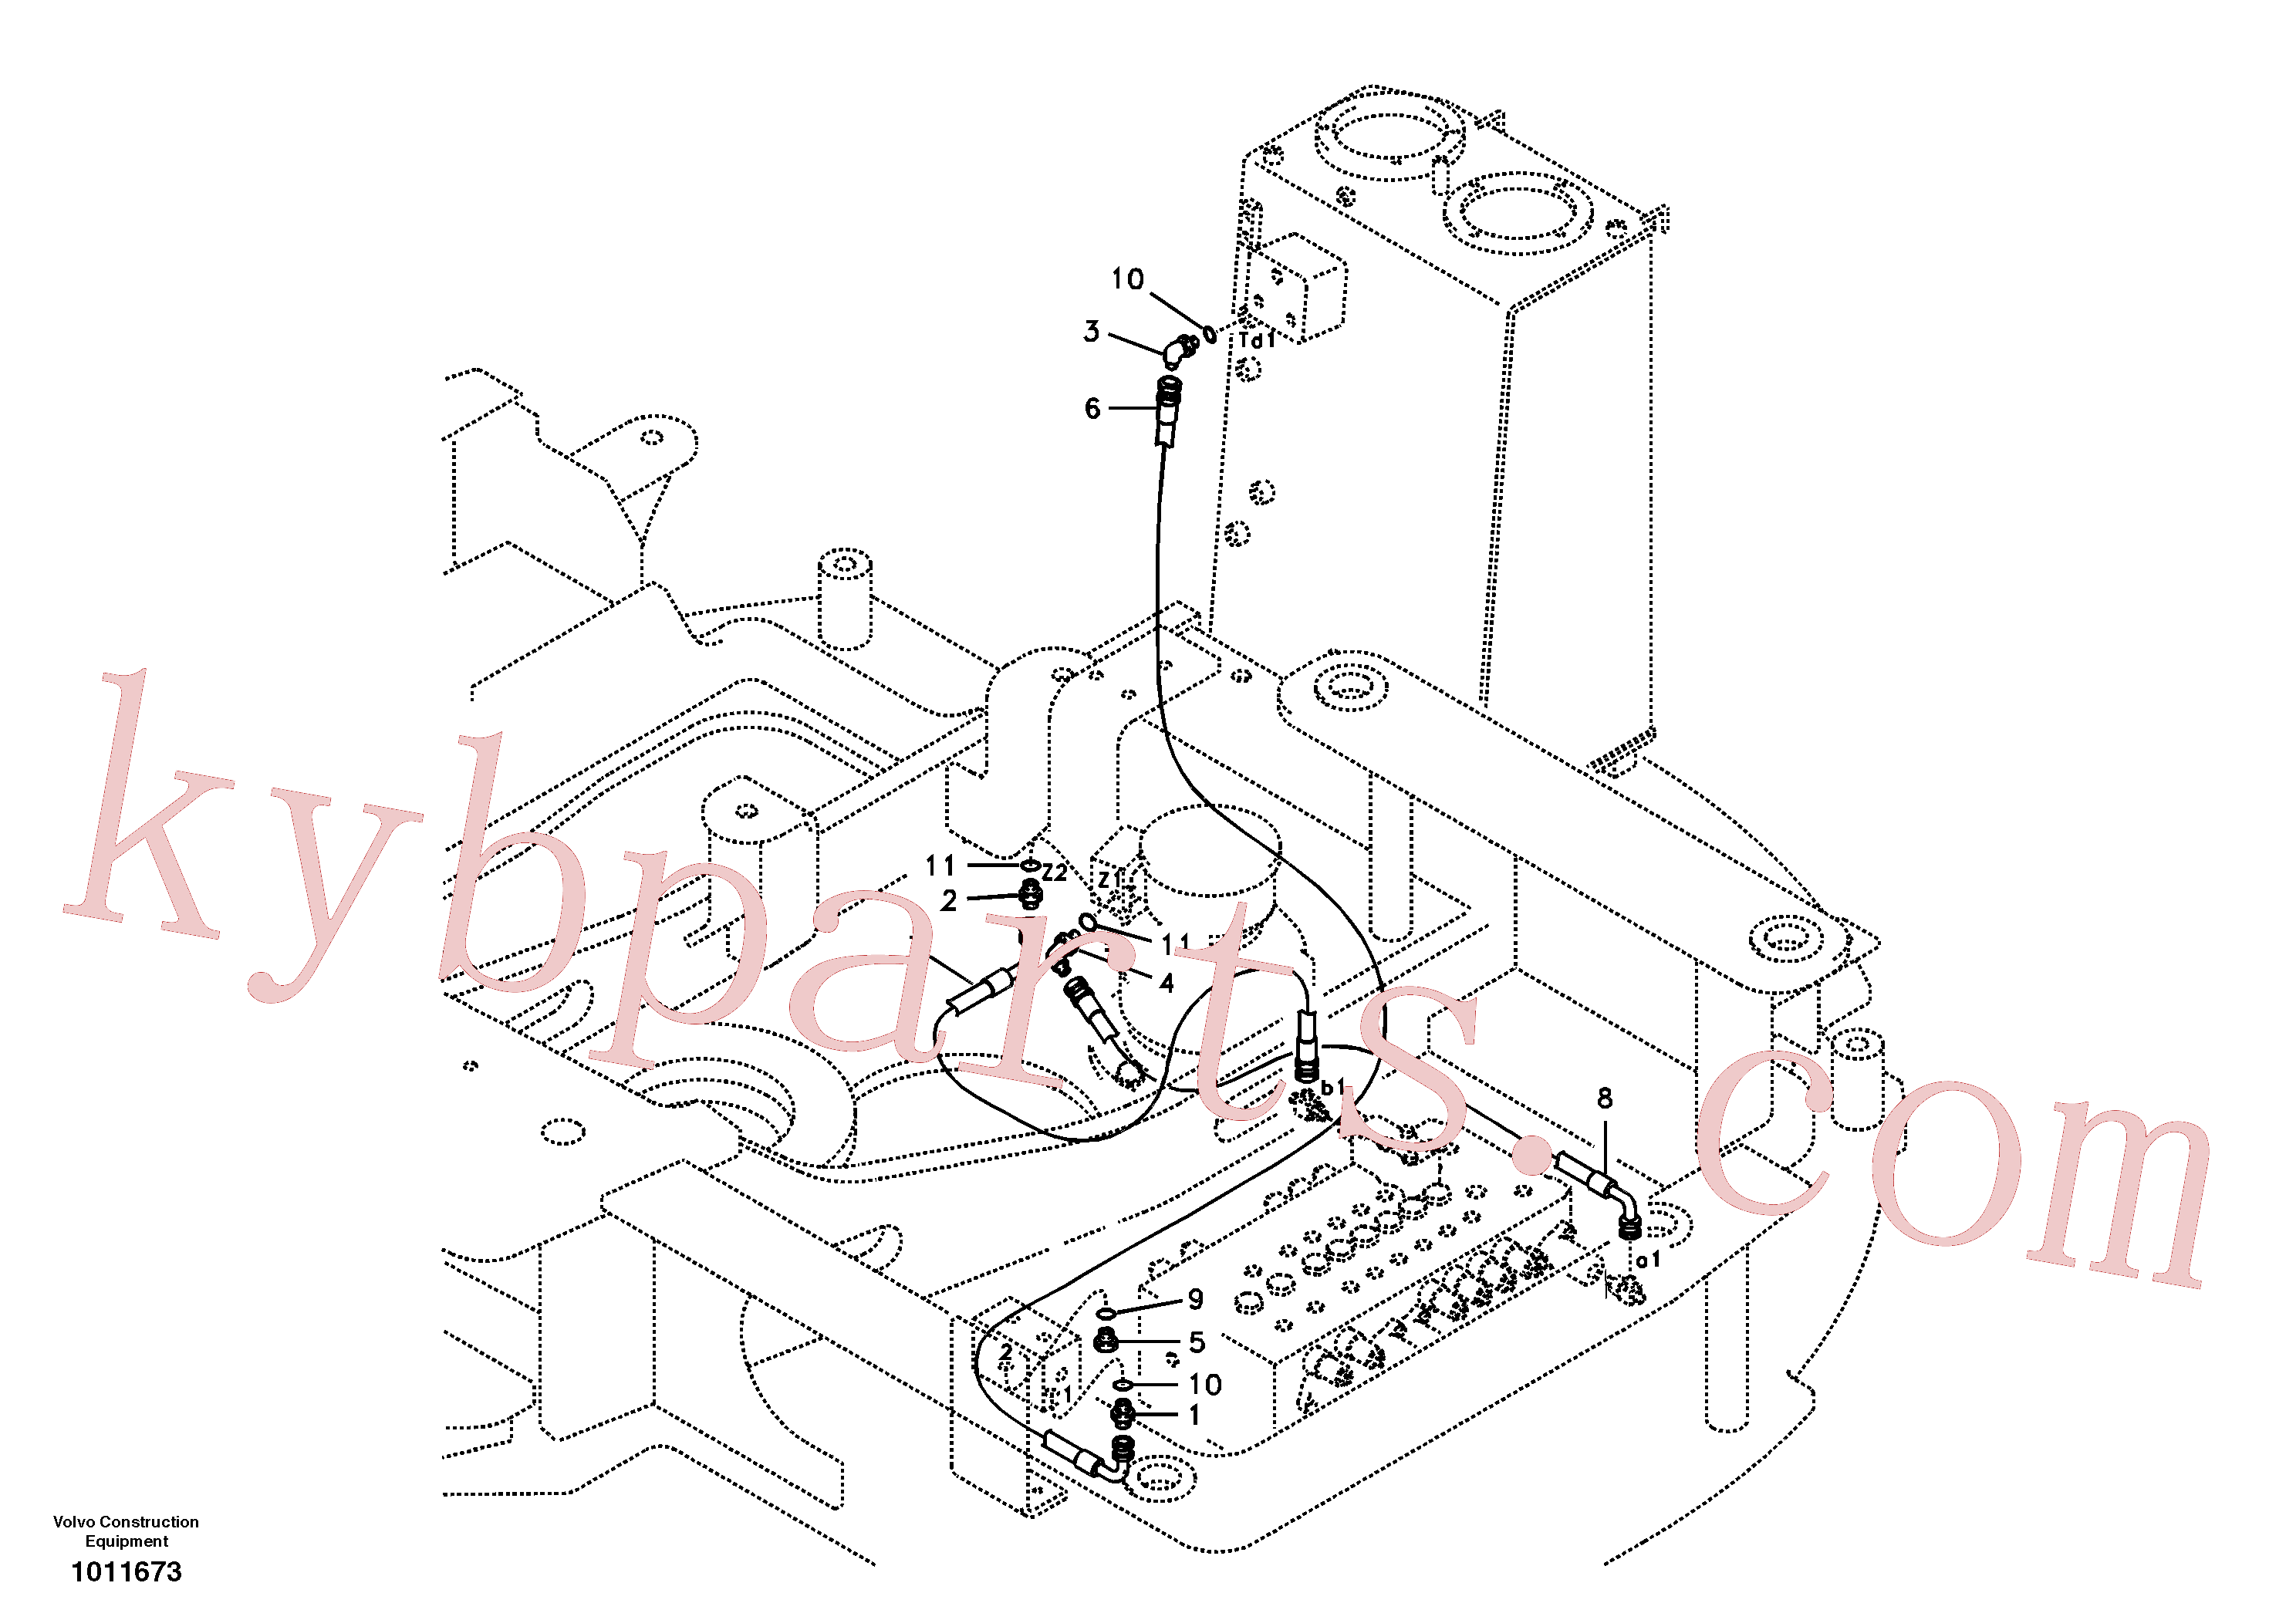 SA9511-42906 for Volvo Servo system, control valve piping.(1011673 assembly)